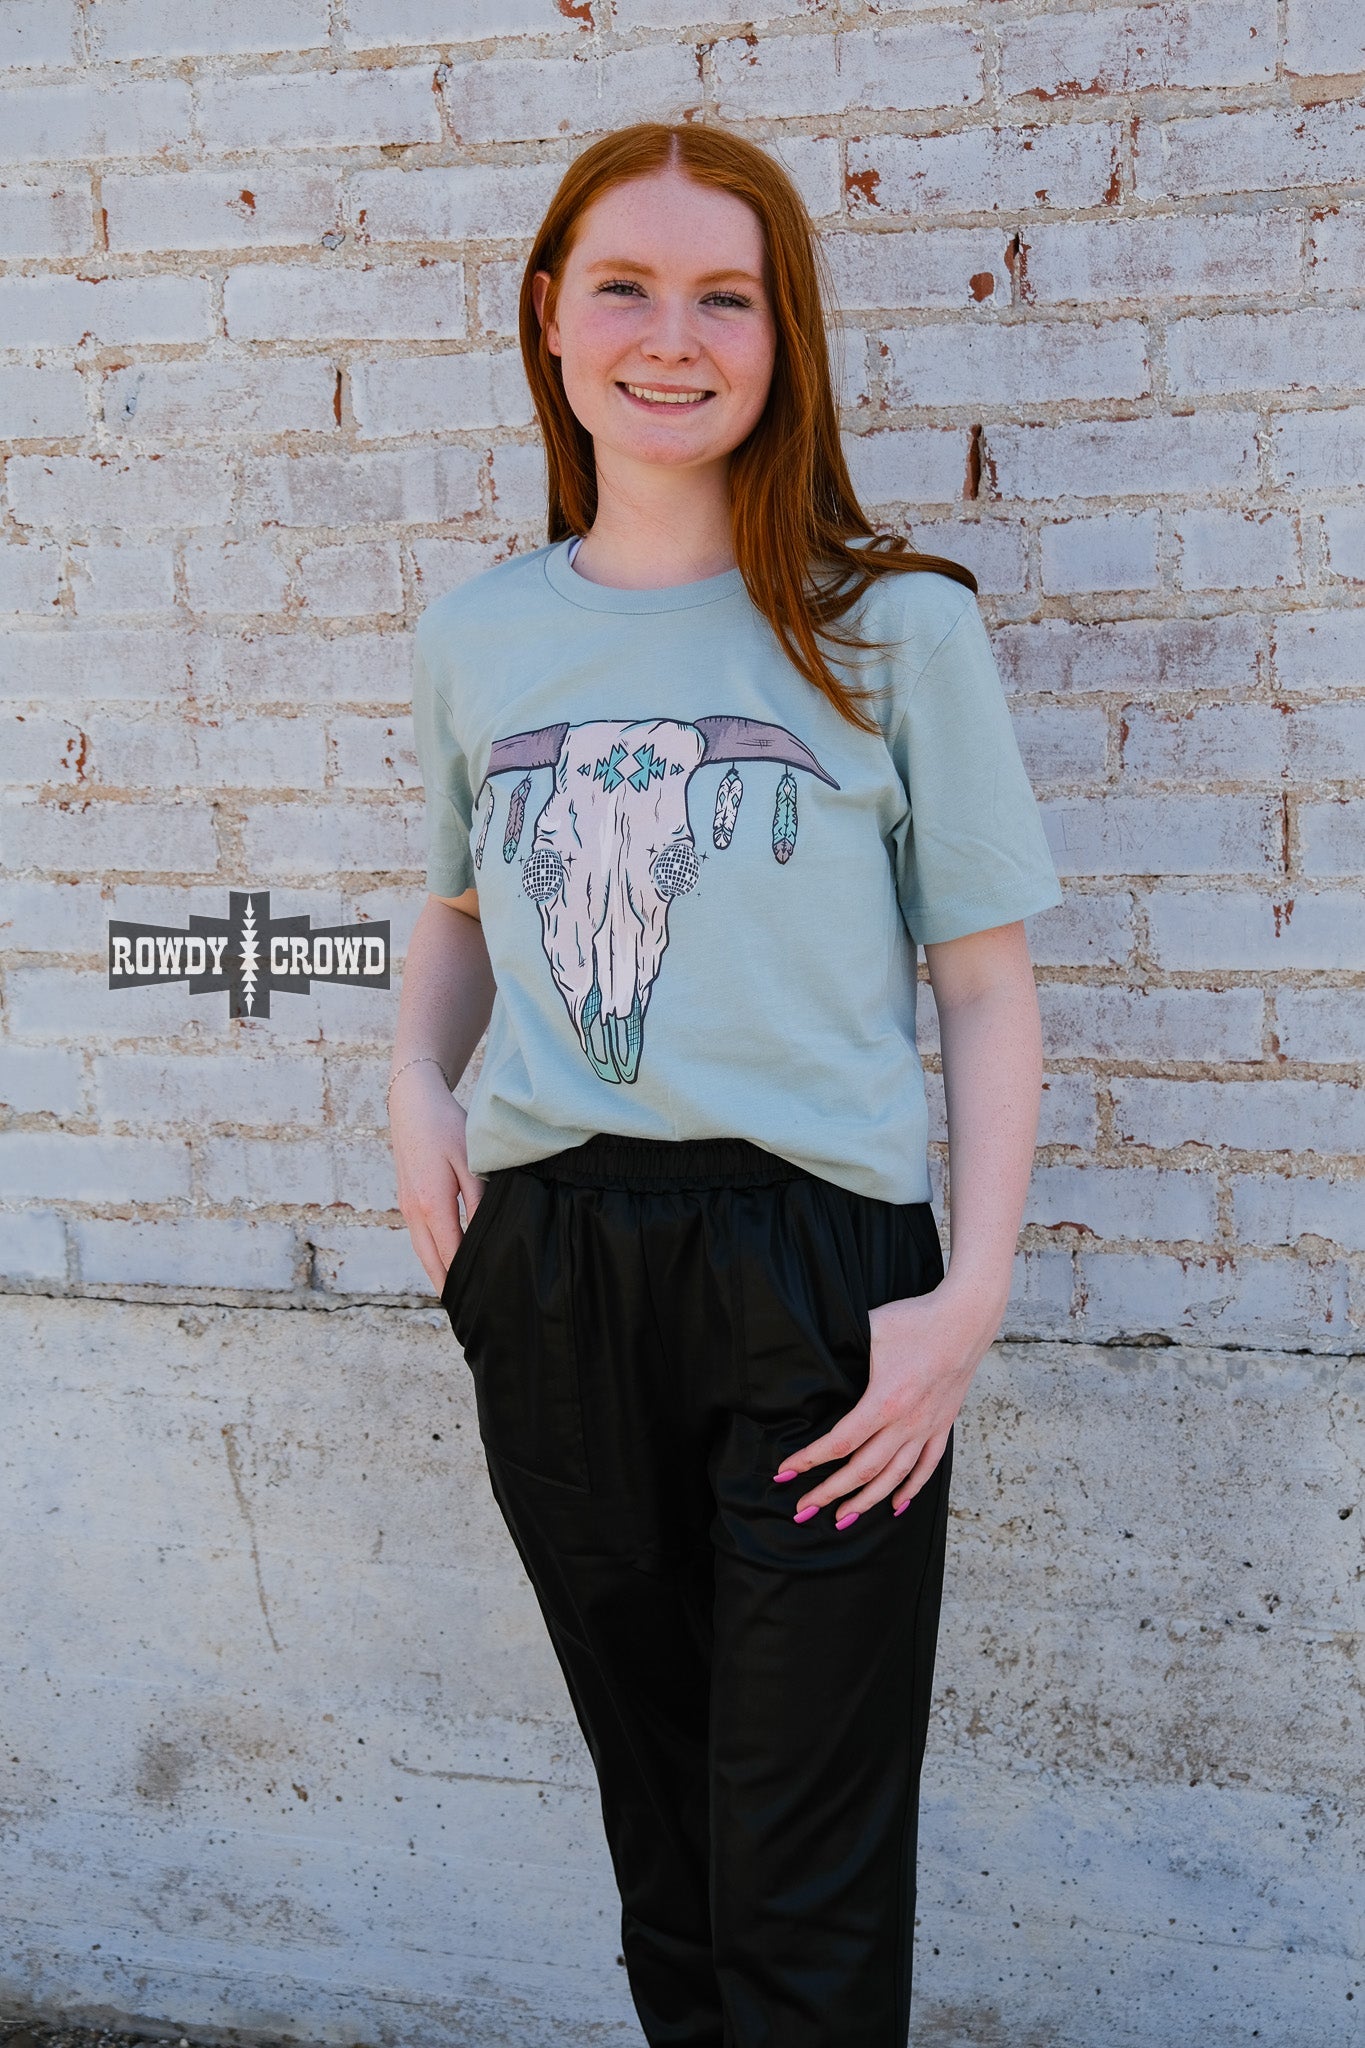 western apparel, western graphic tee, graphic western tees, wholesale clothing, western wholesale, women's western graphic tees, wholesale clothing and jewelry, western boutique clothing, western women's graphic tee, steer skull tee, disco steer skull, western boho tee, western steer skull